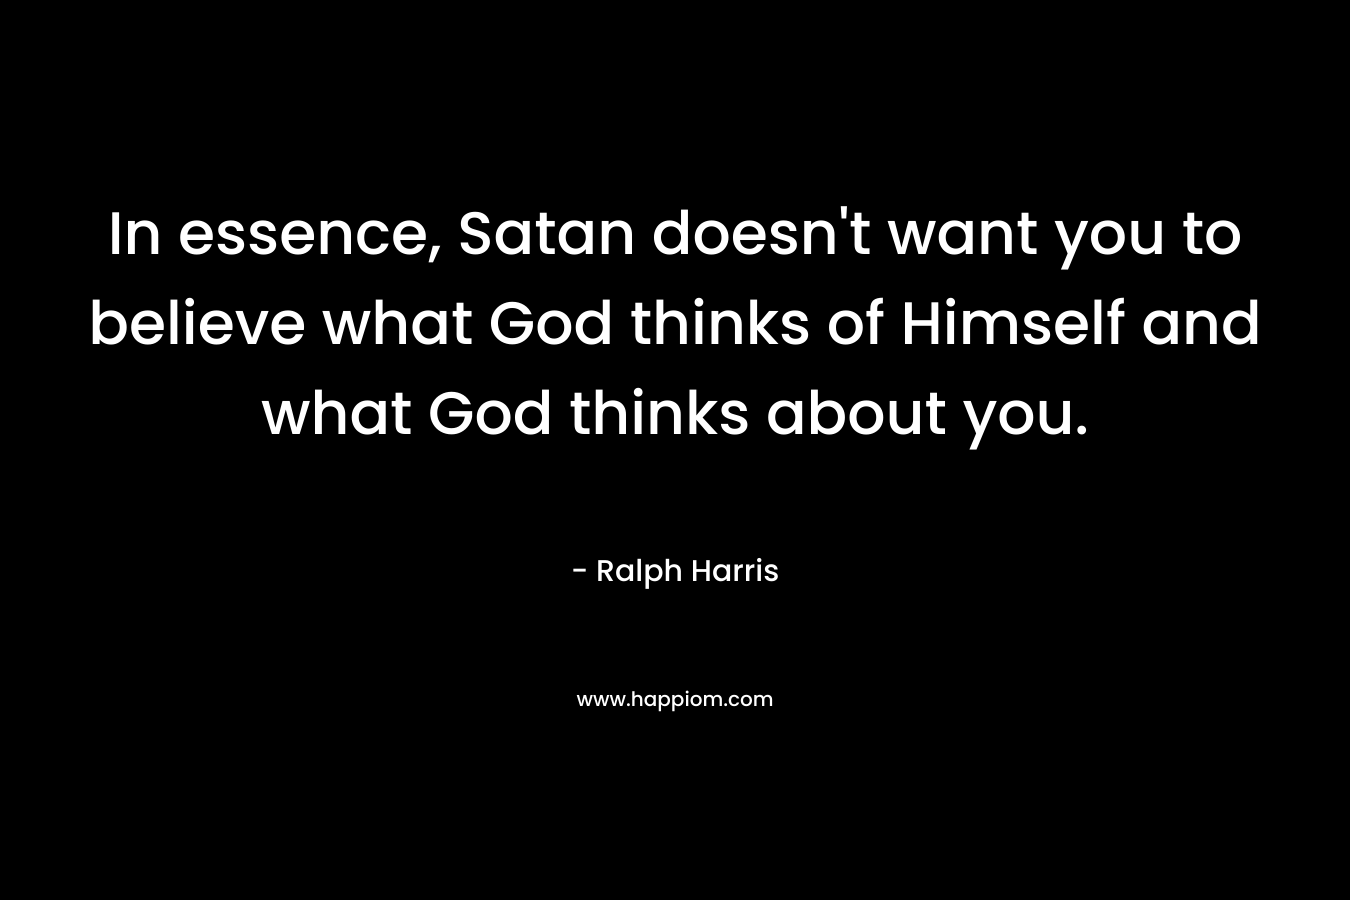 In essence, Satan doesn't want you to believe what God thinks of Himself and what God thinks about you.